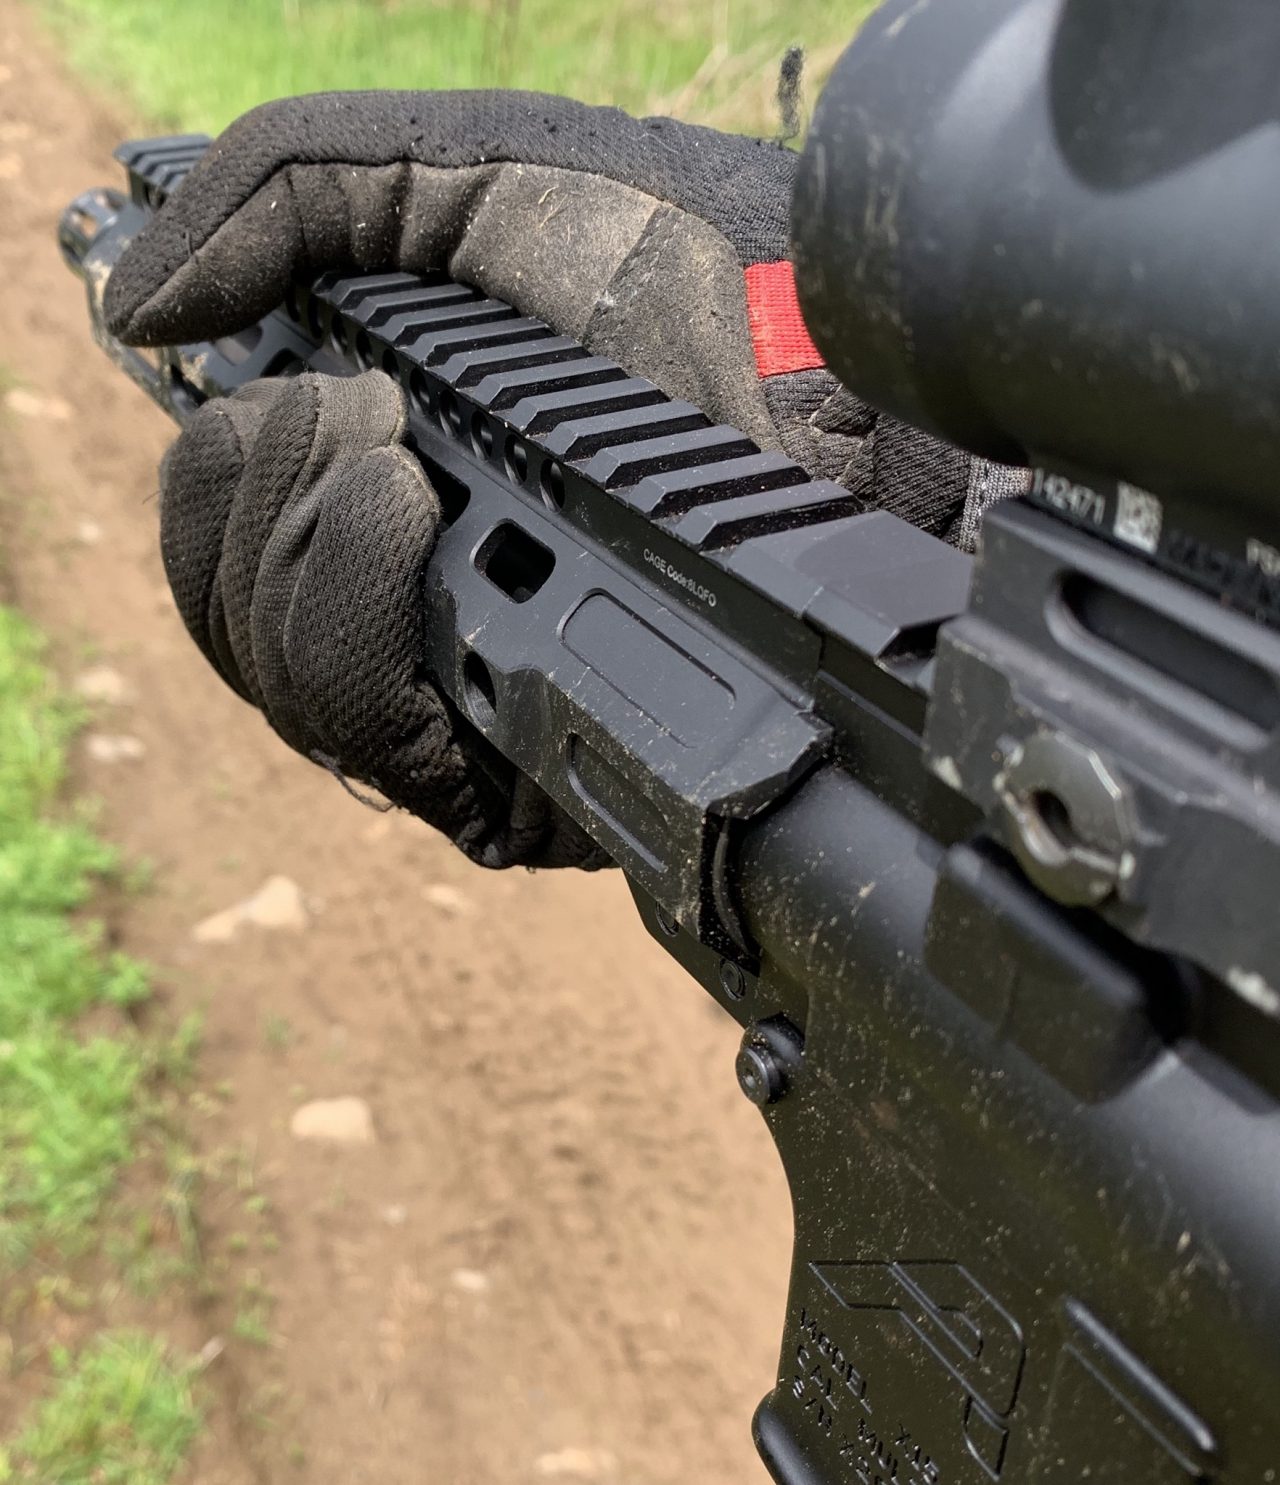 The small 1.5” outer diameter of the handguard allows me with size large hands in gloves, can get a full grip very easily. 